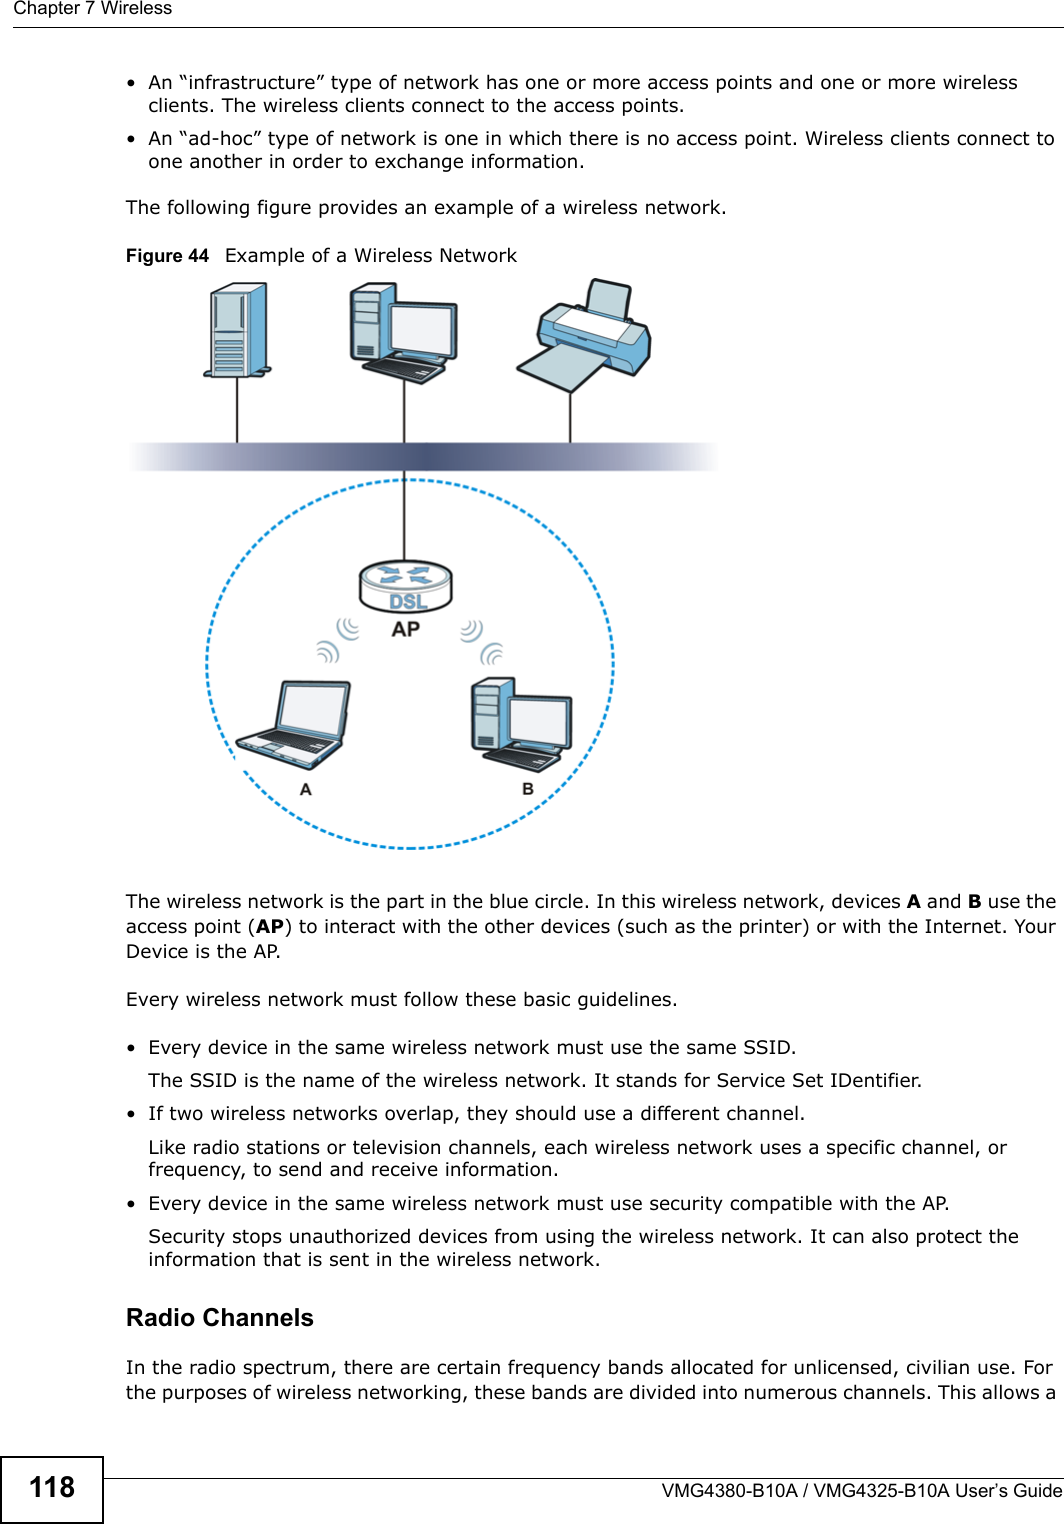 Chapter 7 WirelessVMG4380-B10A / VMG4325-B10A User’s Guide118• An “infrastructure” type of network has one or more access points and one or more wireless clients. The wireless clients connect to the access points.• An “ad-hoc” type of network is one in which there is no access point. Wireless clients connect to one another in order to exchange information.The following figure provides an example of a wireless network.Figure 44   Example of a Wireless NetworkThe wireless network is the part in the blue circle. In this wireless network, devices A and B use the access point (AP) to interact with the other devices (such as the printer) or with the Internet. YourDevice is the AP.Every wireless network must follow these basic guidelines.• Every device in the same wireless network must use the same SSID.The SSID is the name of the wireless network. It stands for Service Set IDentifier.• If two wireless networks overlap, they should use a different channel.Like radio stations or television channels, each wireless network uses a specific channel, or frequency, to send and receive information.• Every device in the same wireless network must use security compatible with the AP.Security stops unauthorized devices from using the wireless network. It can also protect the information that is sent in the wireless network.Radio ChannelsIn the radio spectrum, there are certain frequency bands allocated for unlicensed, civilian use. For the purposes of wireless networking, these bands are divided into numerous channels. This allows a 